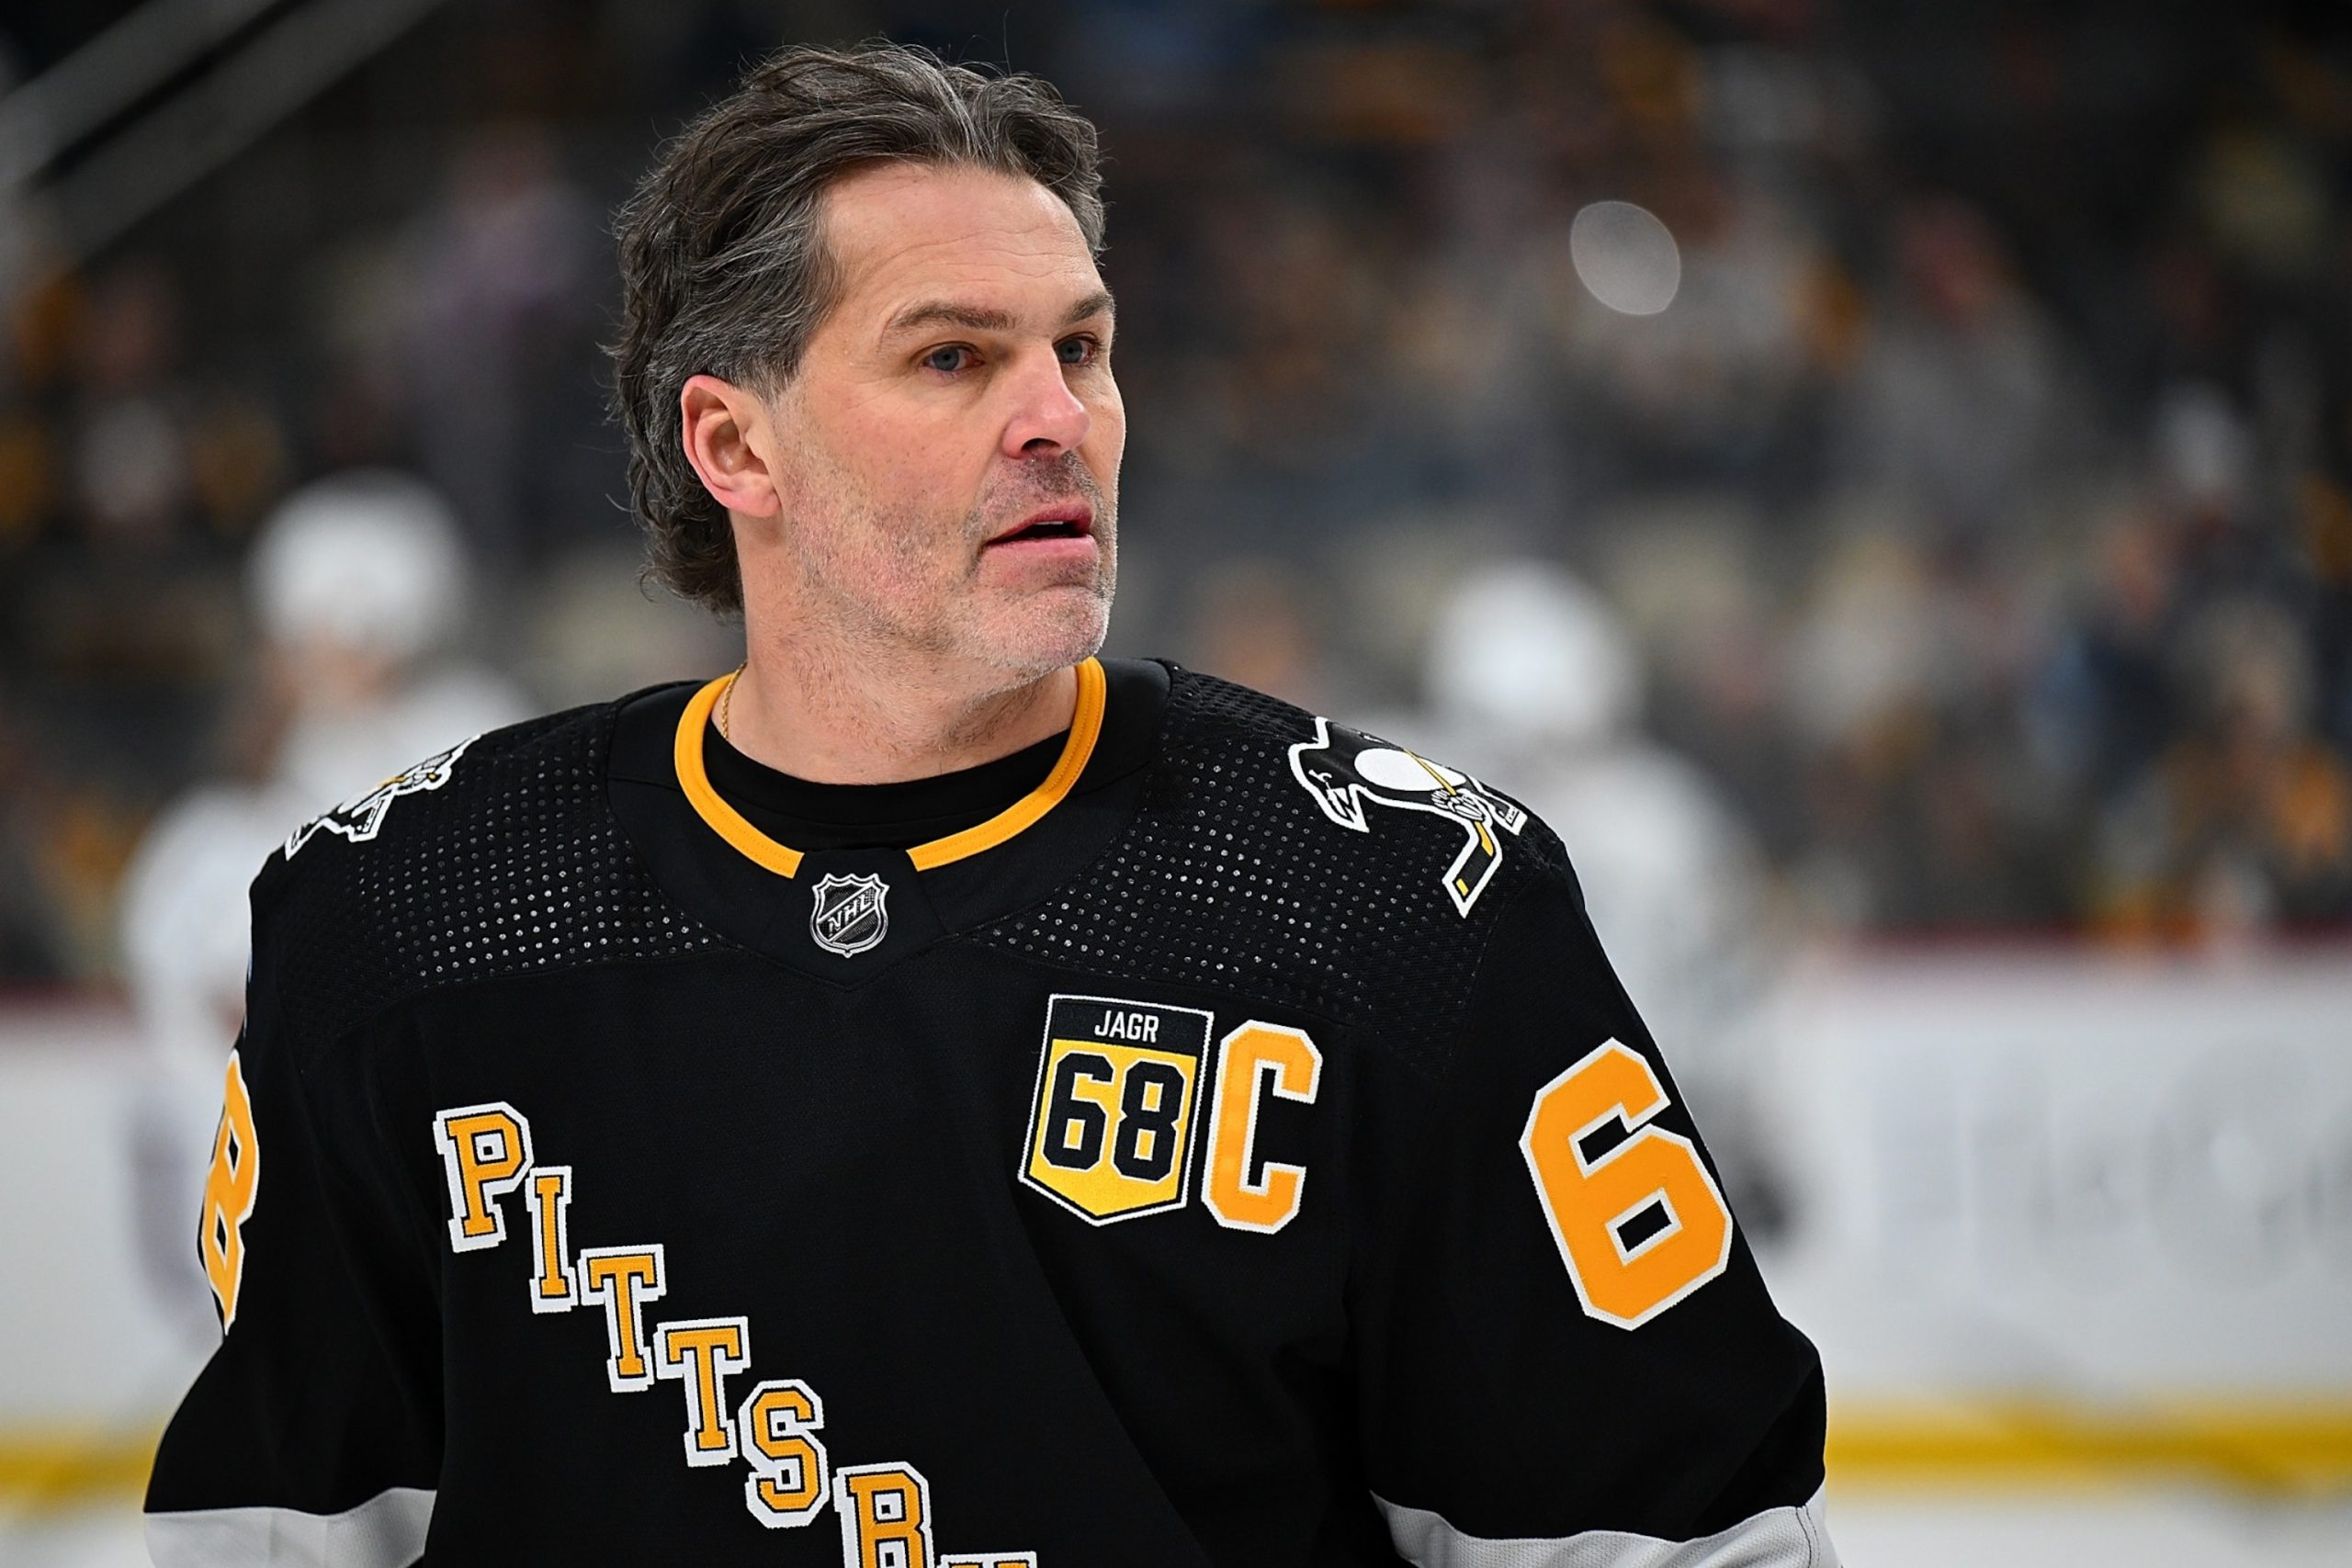 The Pittsburgh Penguins report theft of Jaromir Jagr bobbleheads before game